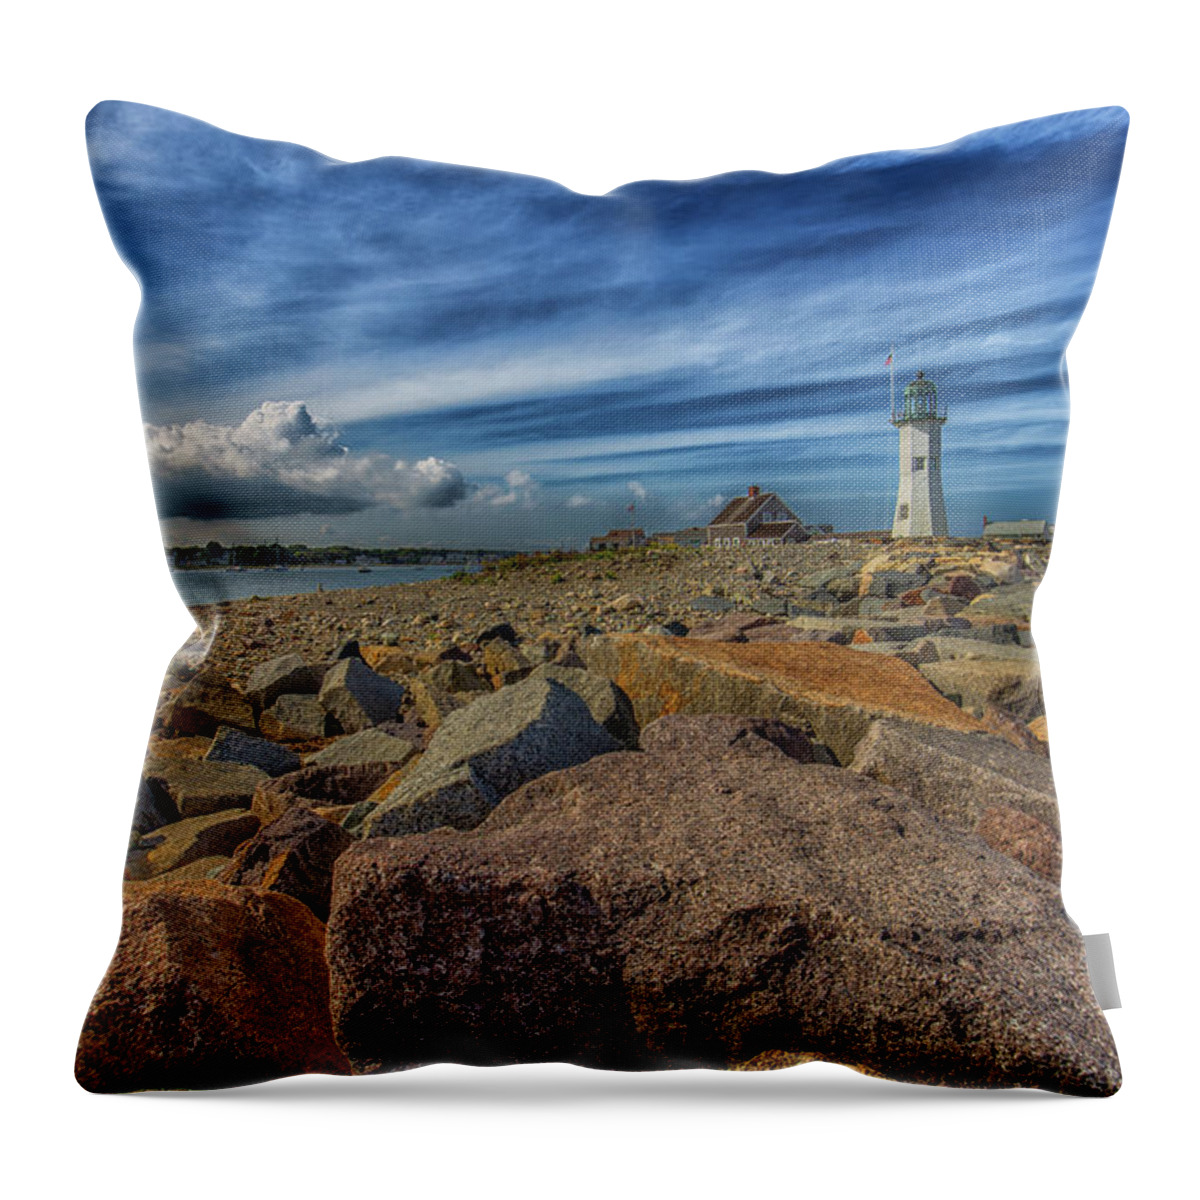 Summer Day At Scituate Lighthouse Throw Pillow featuring the photograph Summer Day At Scituate Lighthouse by Brian MacLean